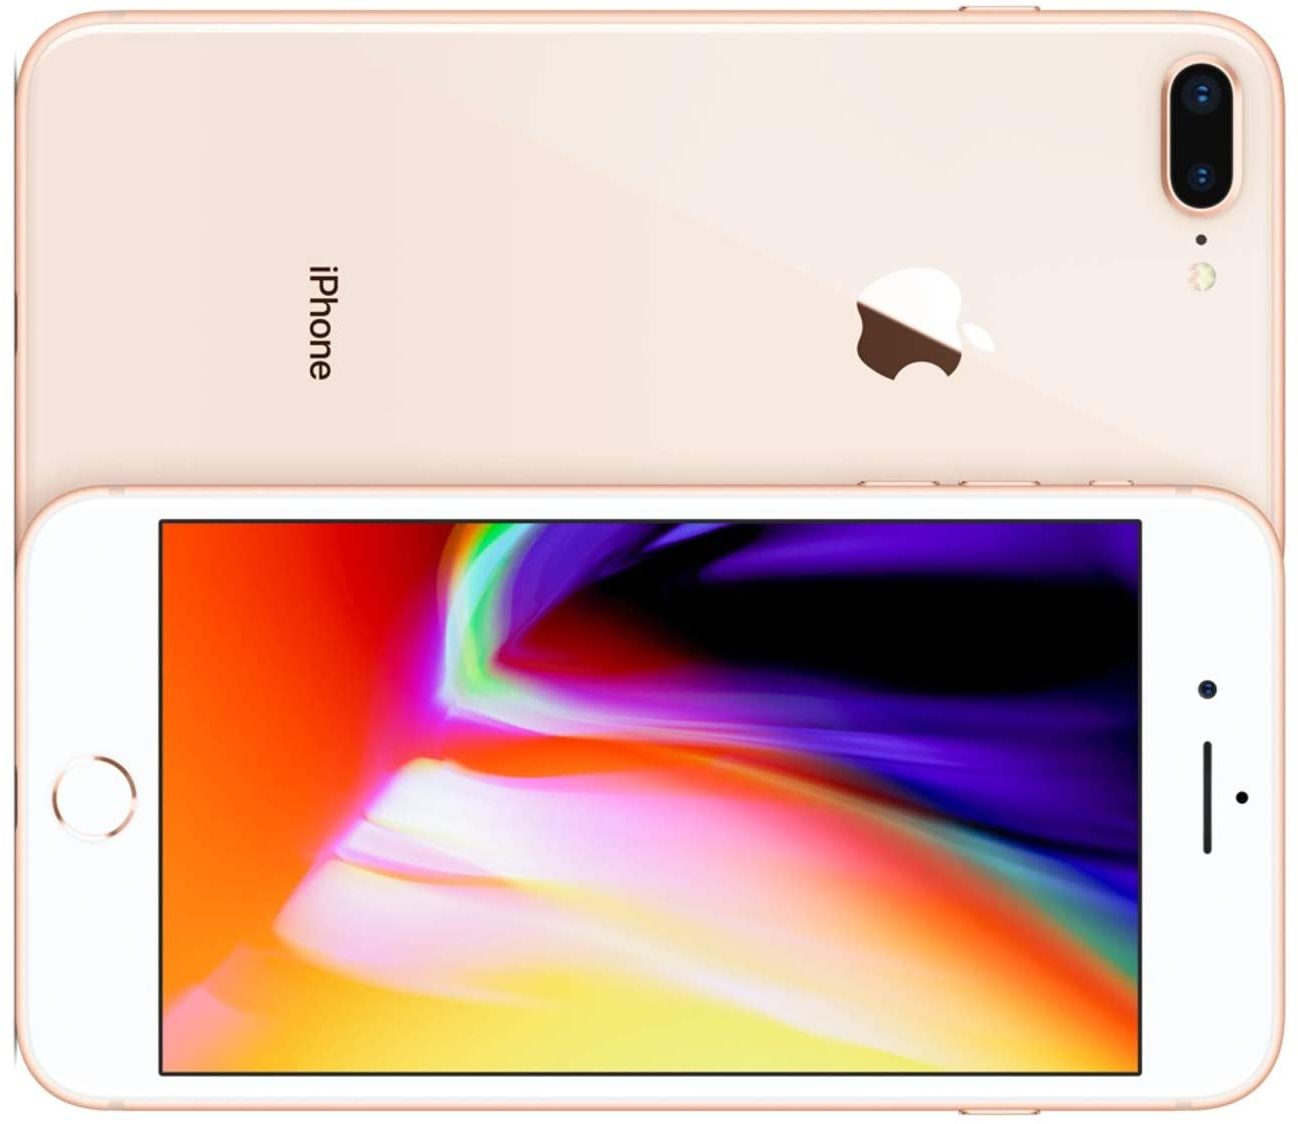 IPhone 8 Price In Nepal